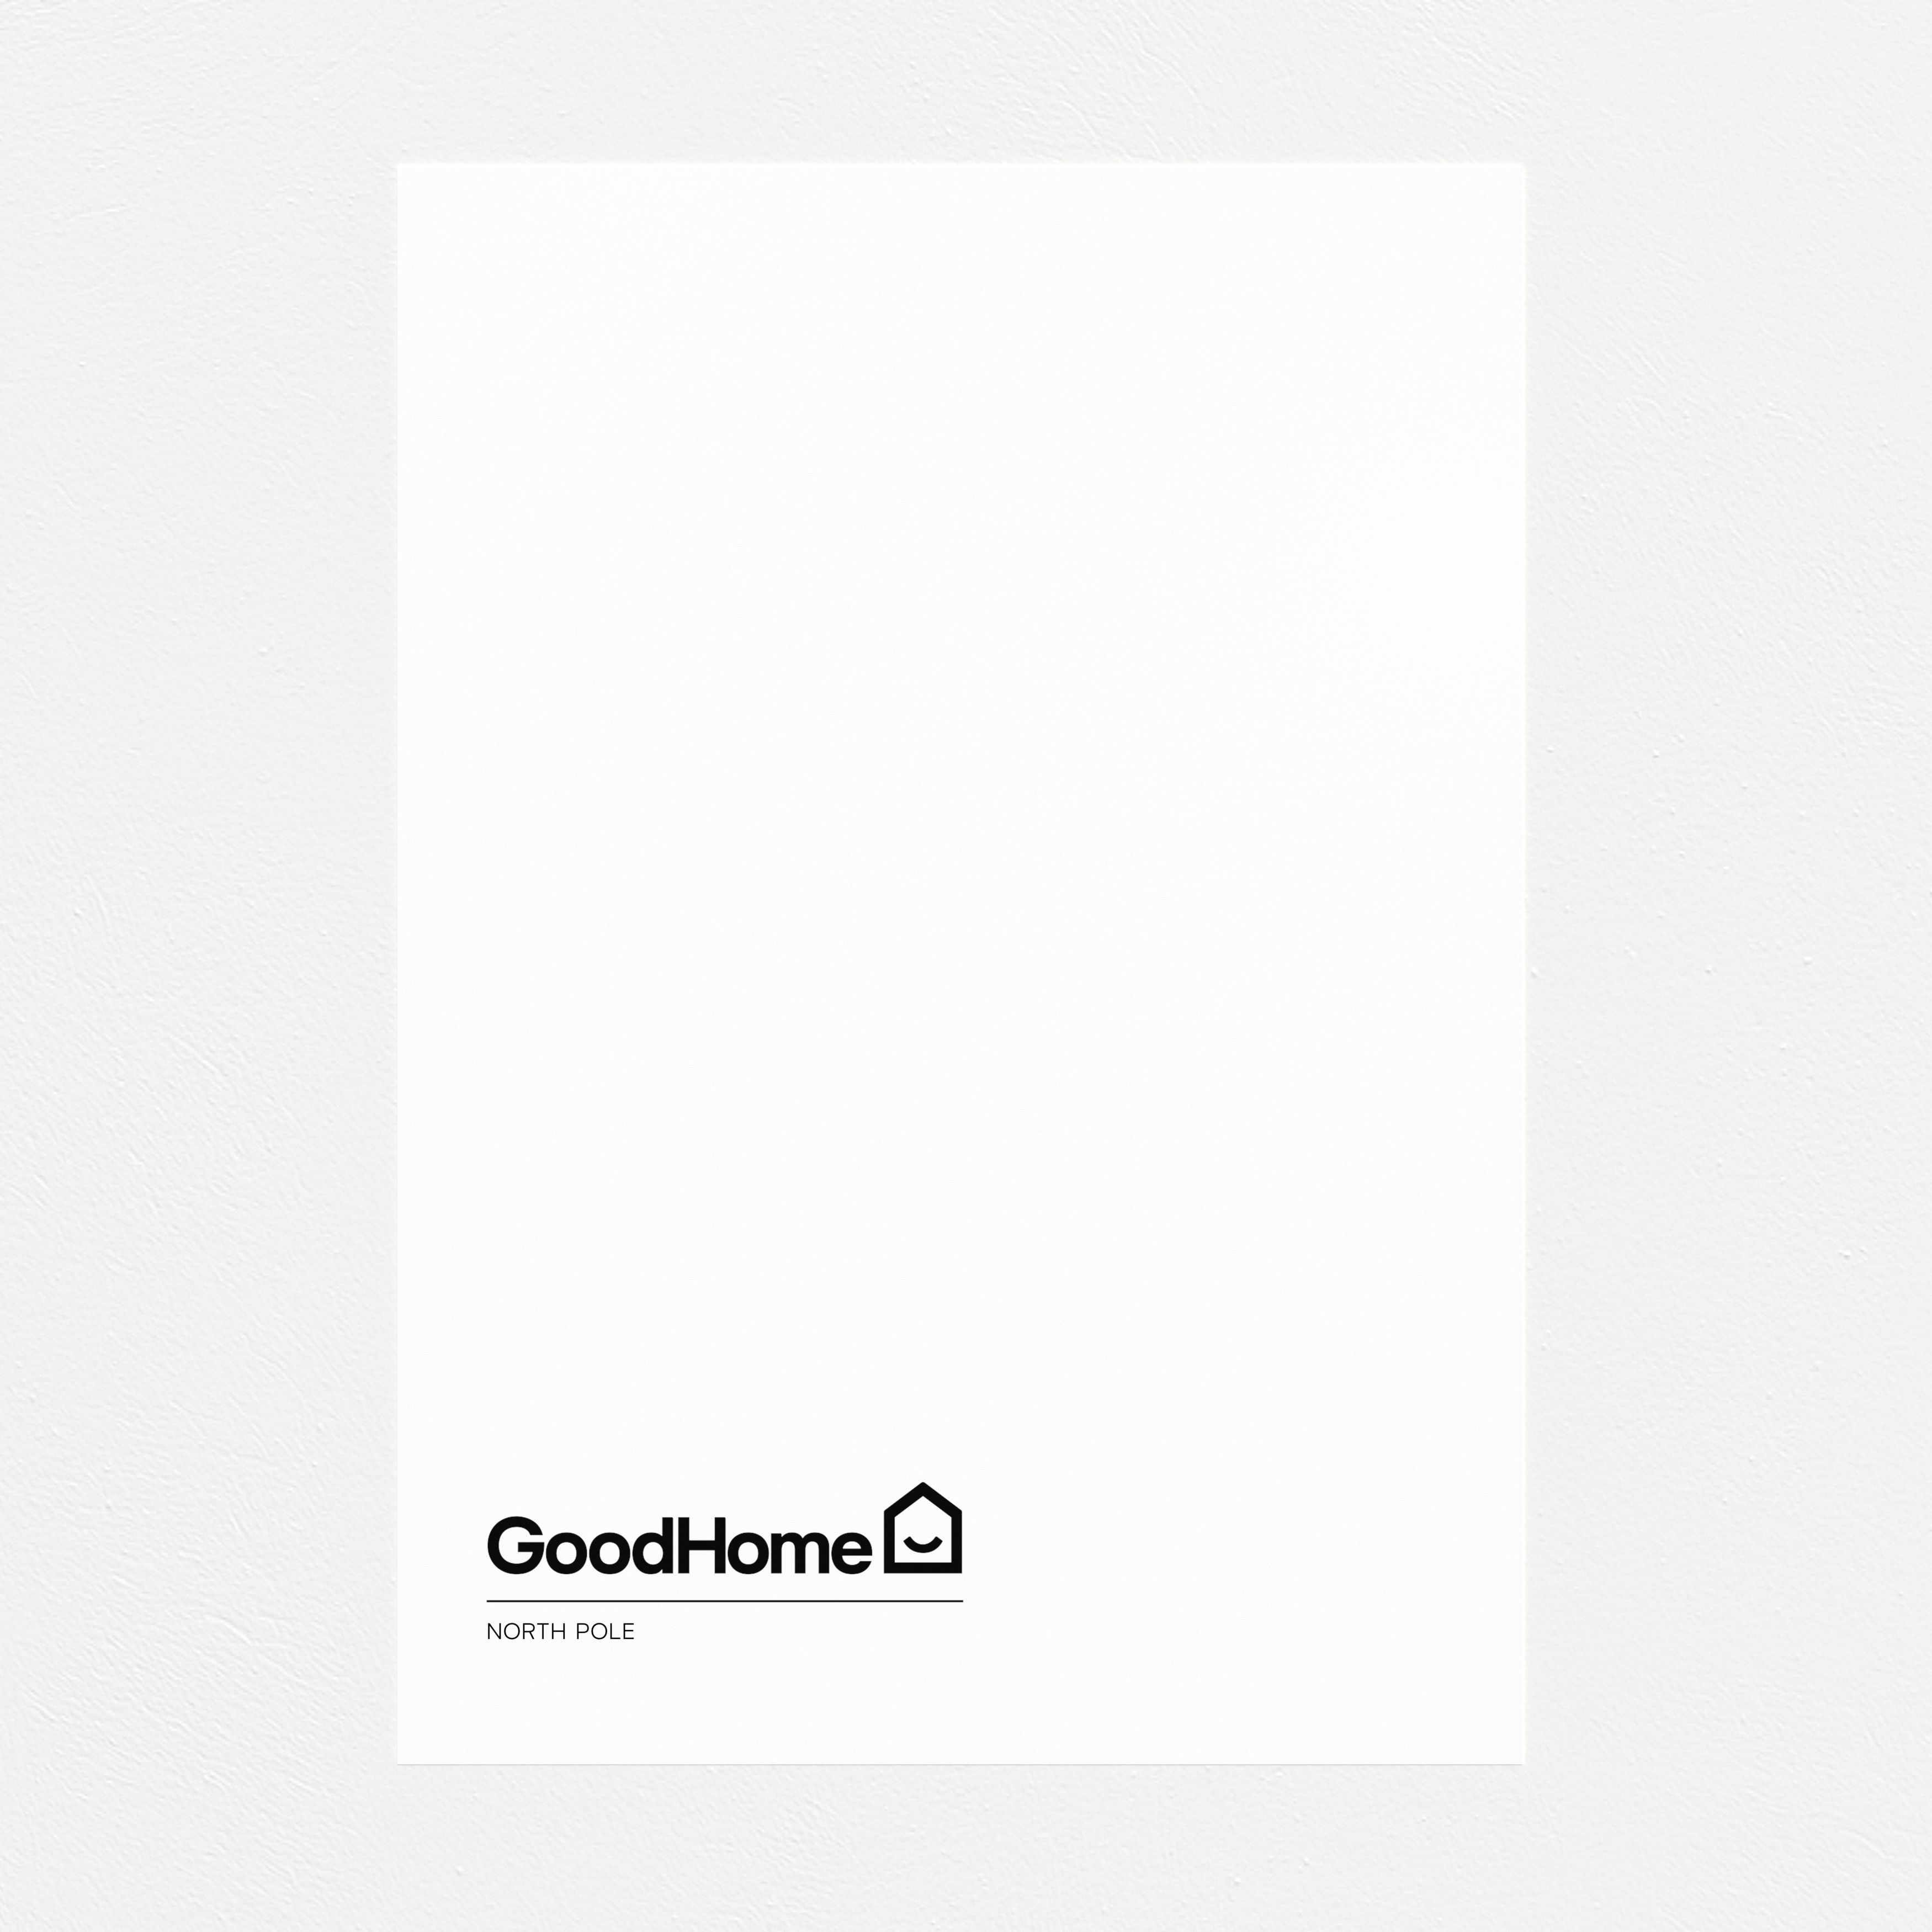 GoodHome Durable North pole (Brilliant white) Gloss Multi-surface paint, 2L